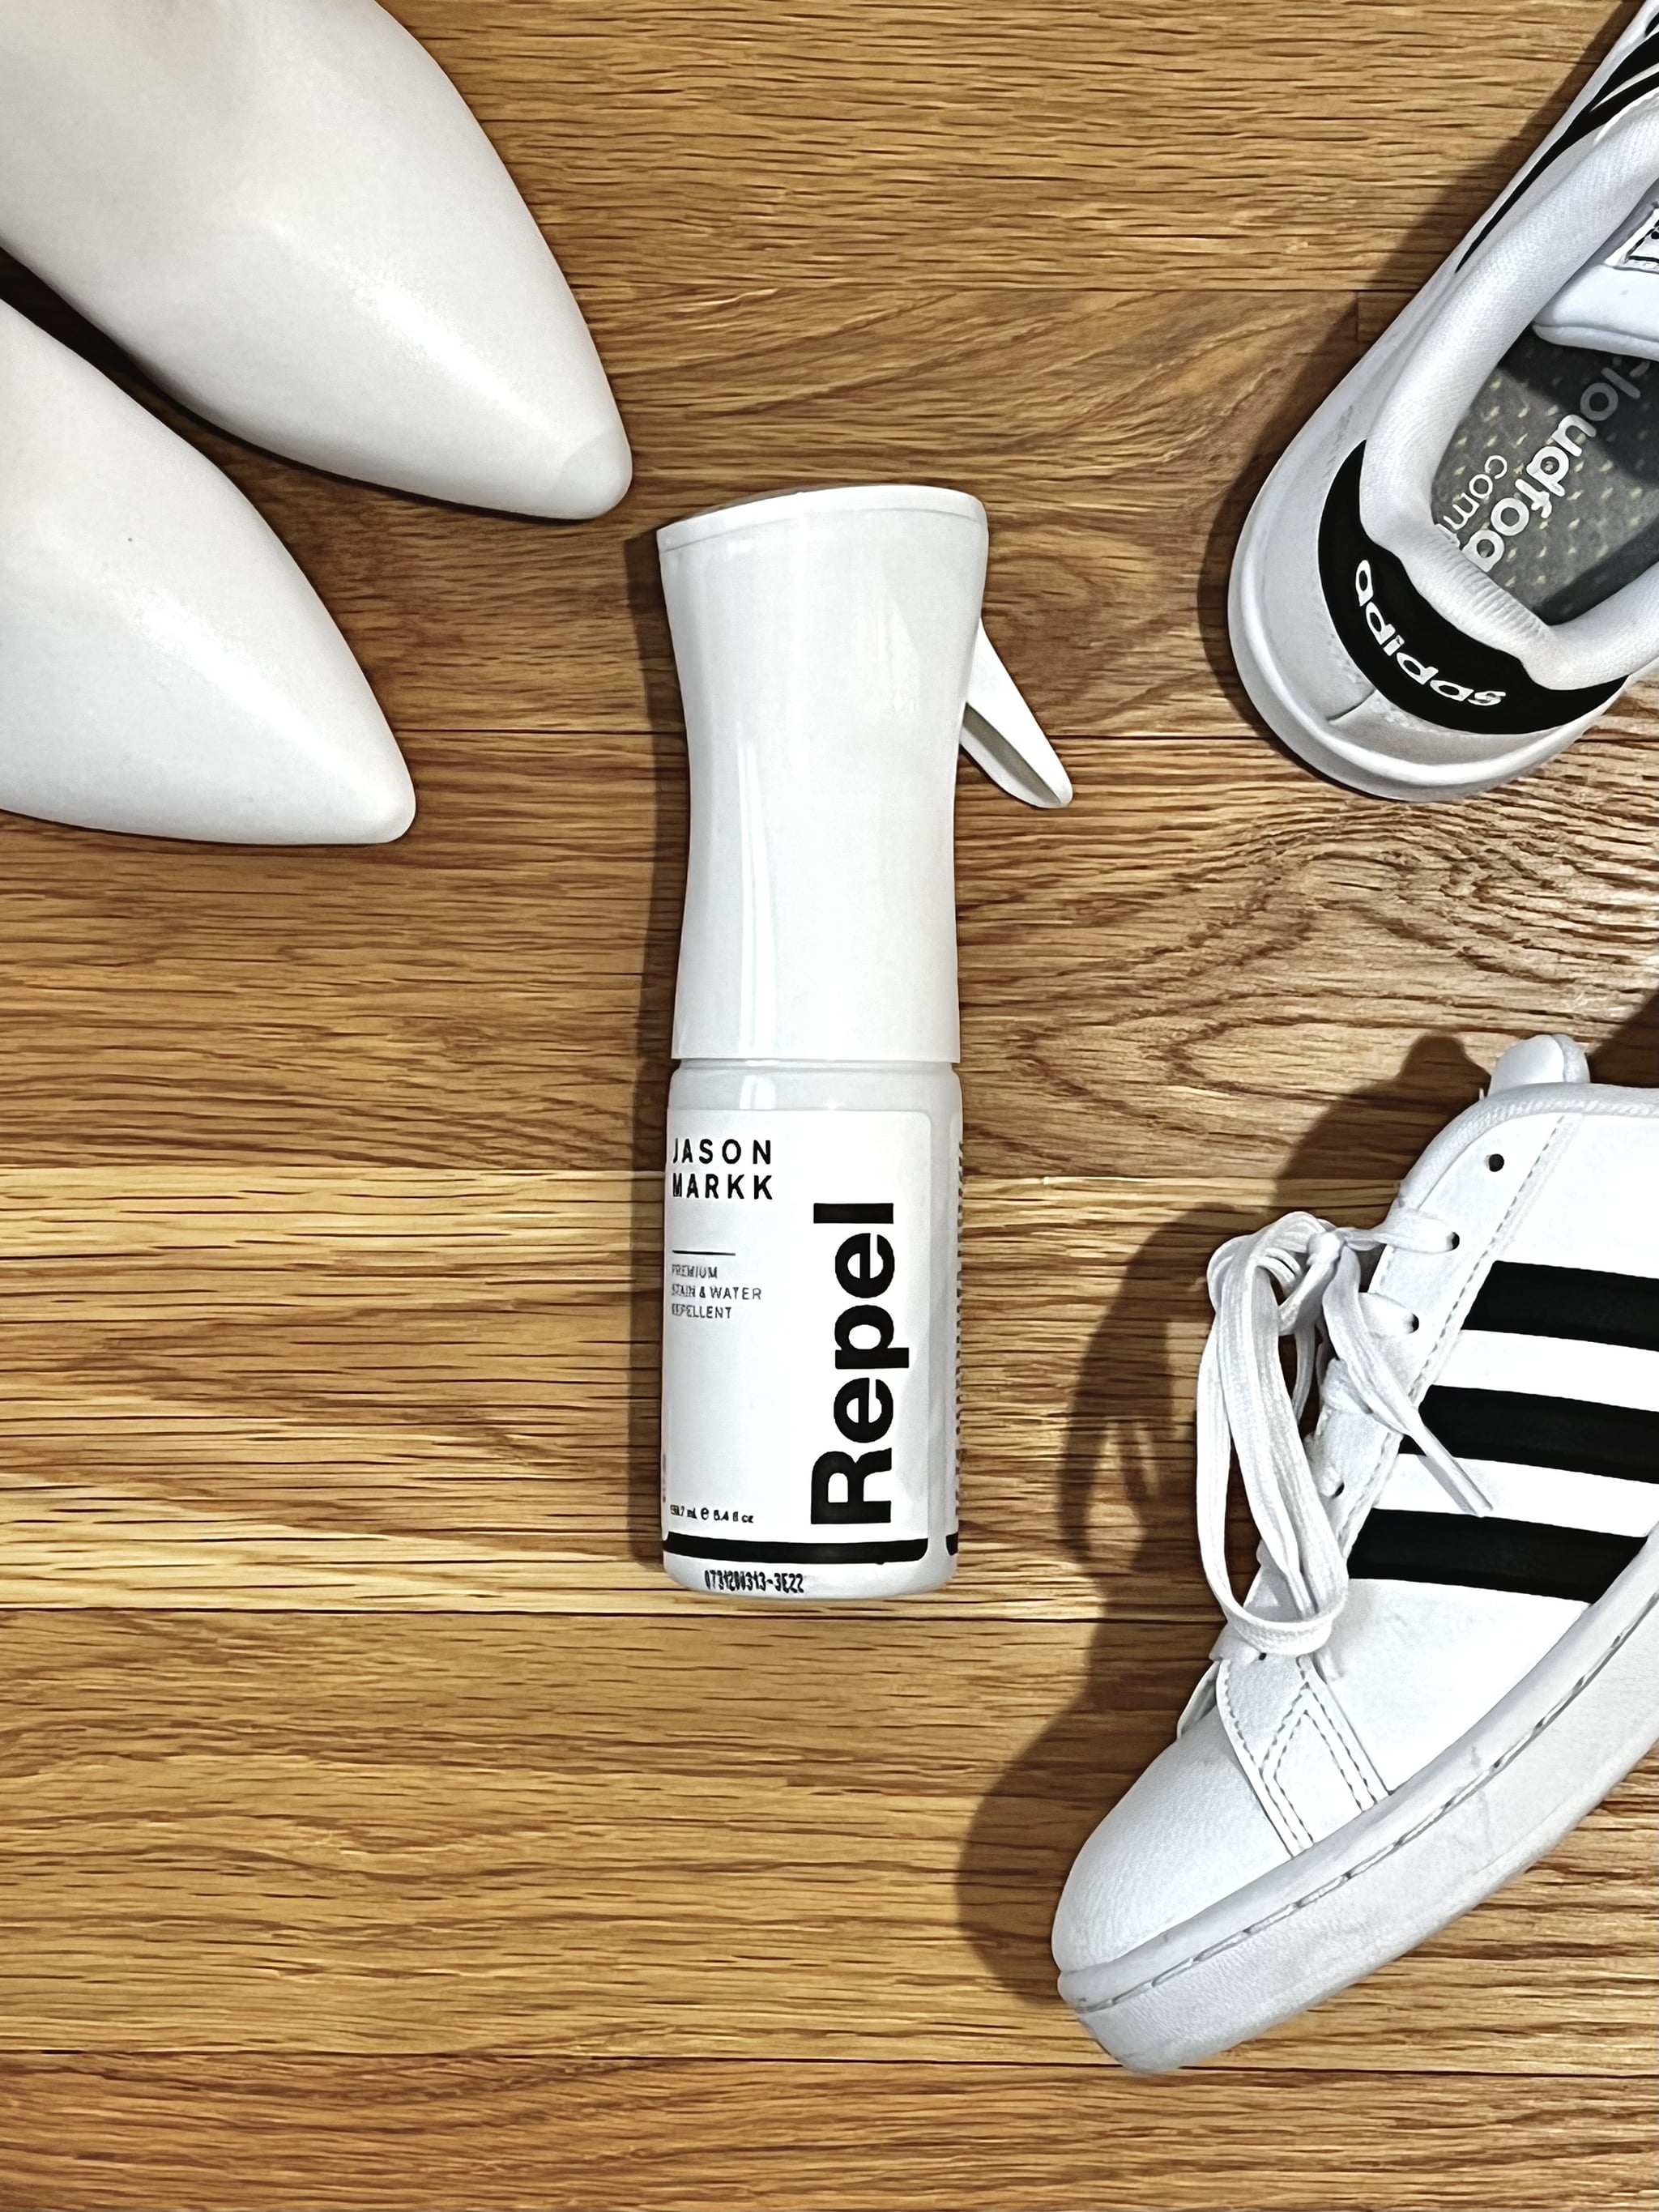 Jason Markk Repel Spray in the middle with a pair of white pointy-toe boots in the left hand corner and Adidas white sneakers on the right side.